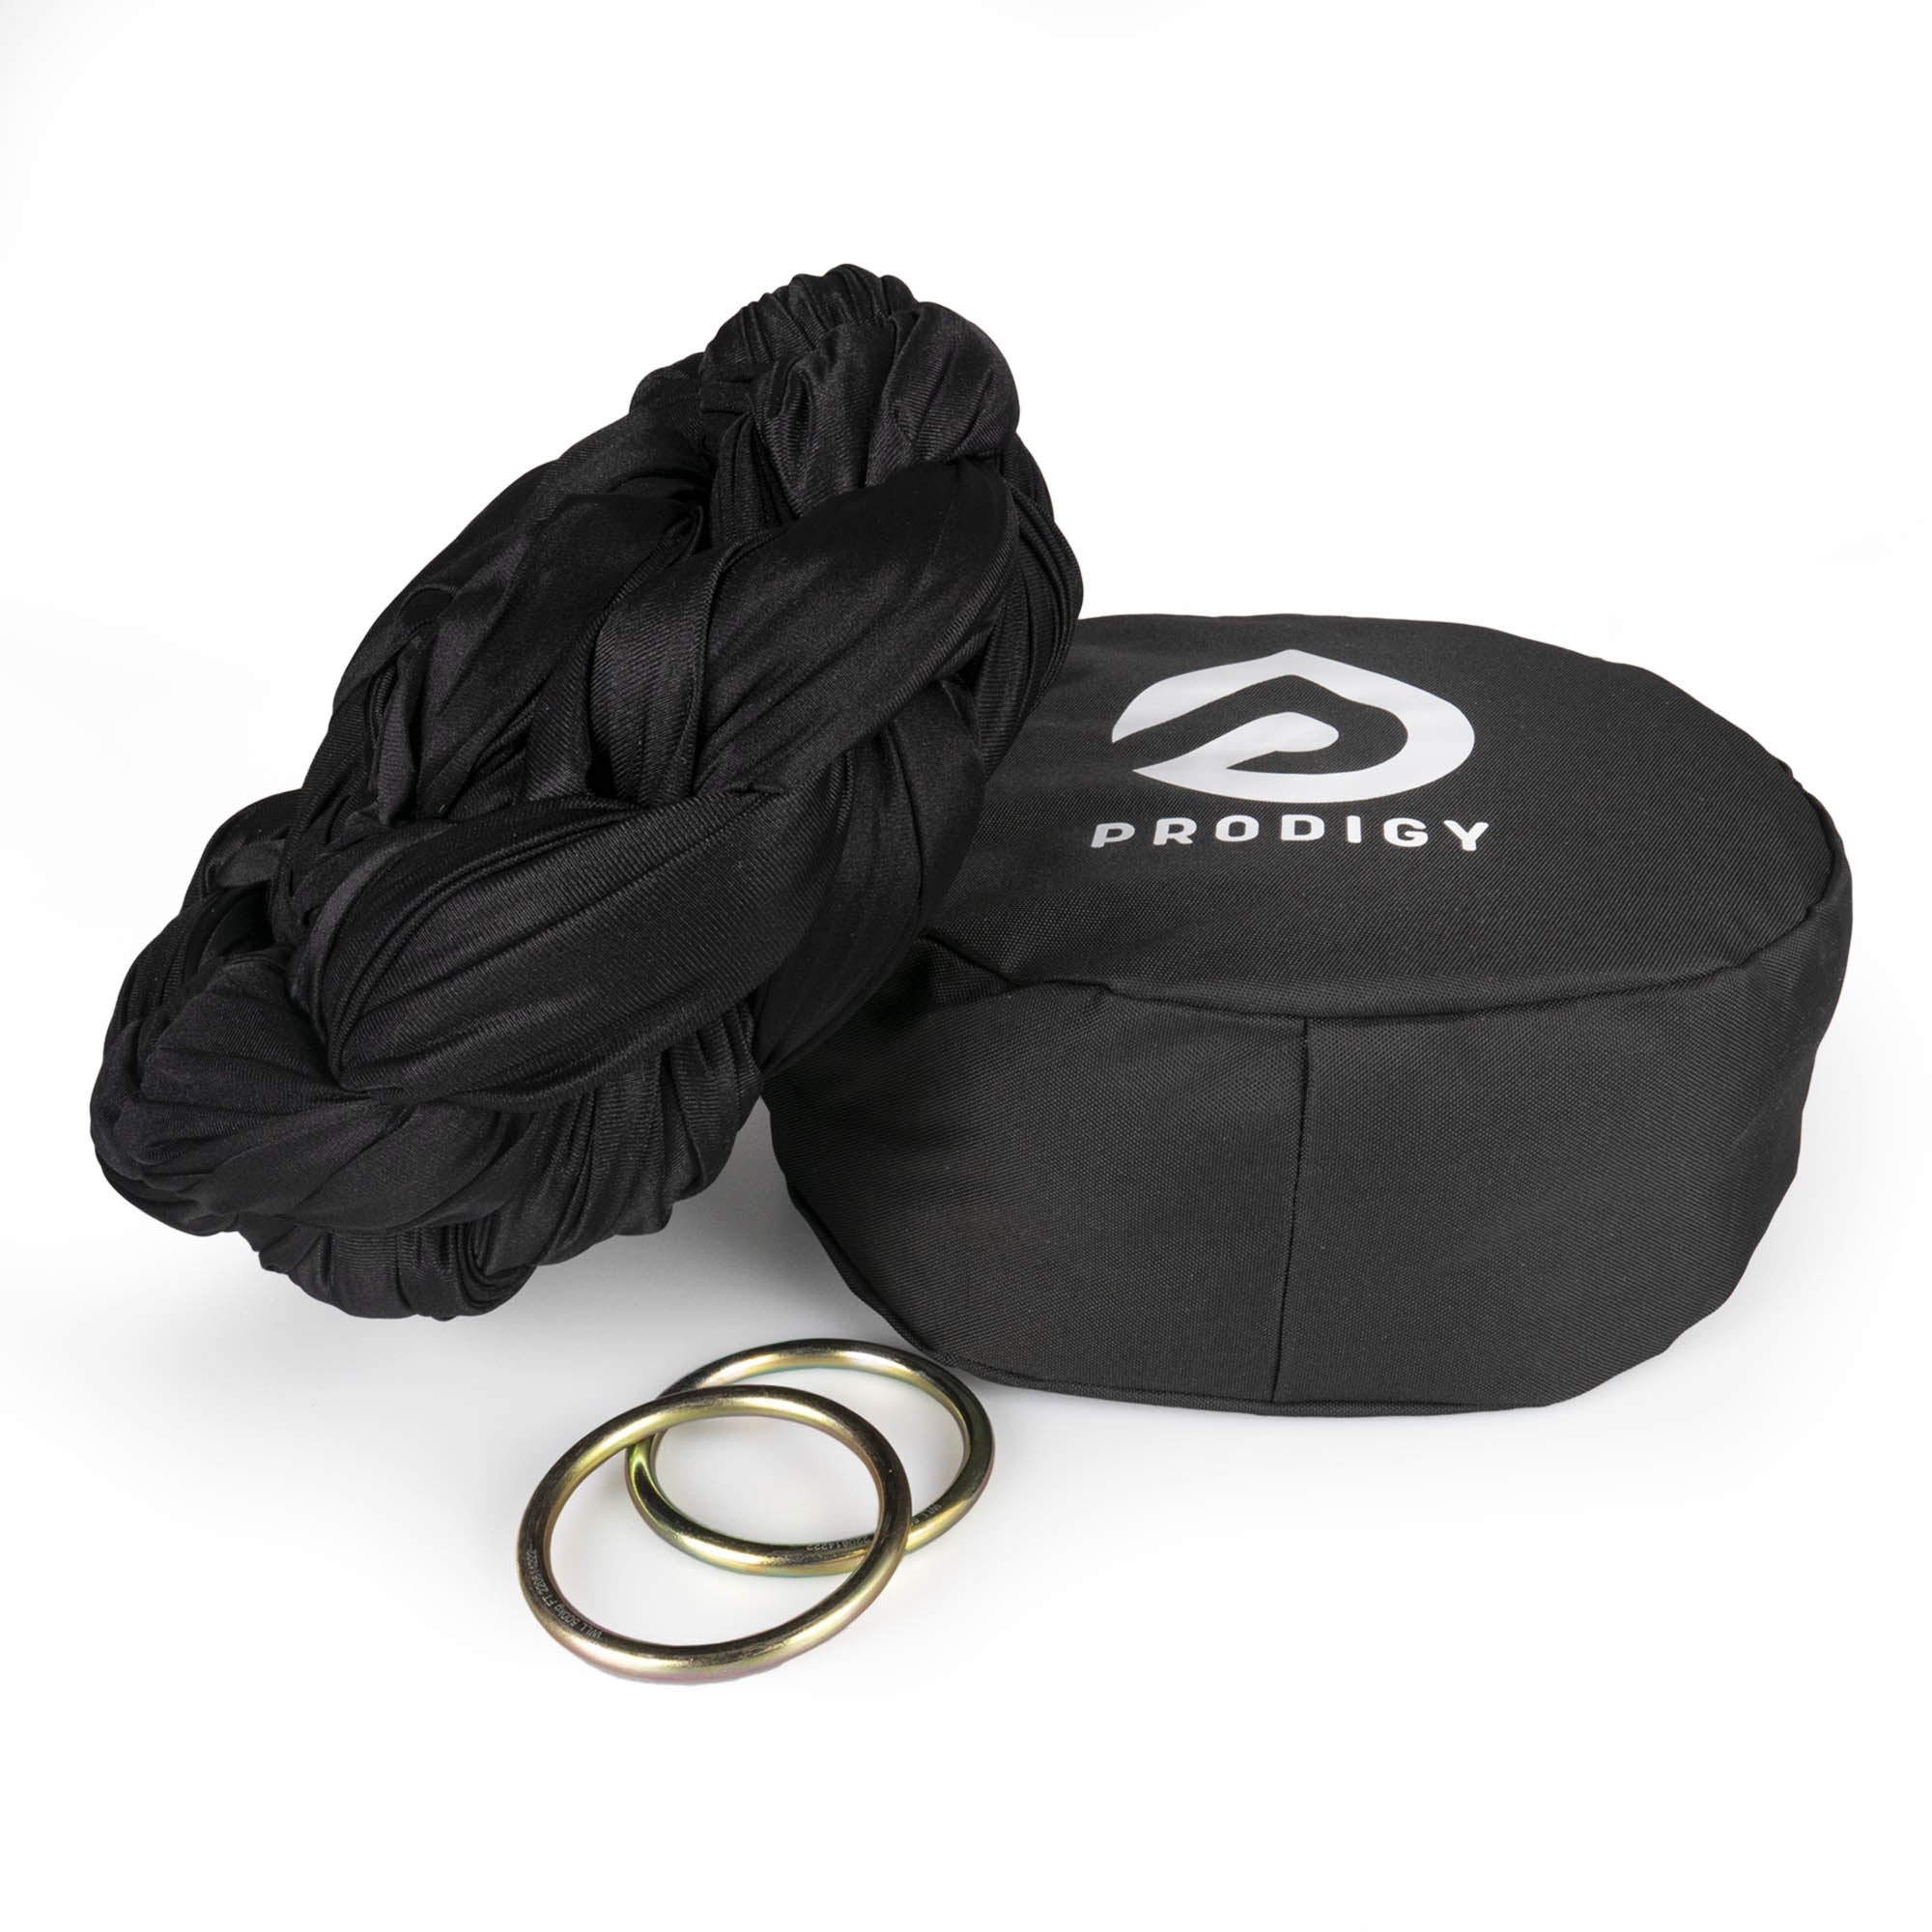 Prodigy aerial sling and O rings and bag - black sling resting on hammock bag